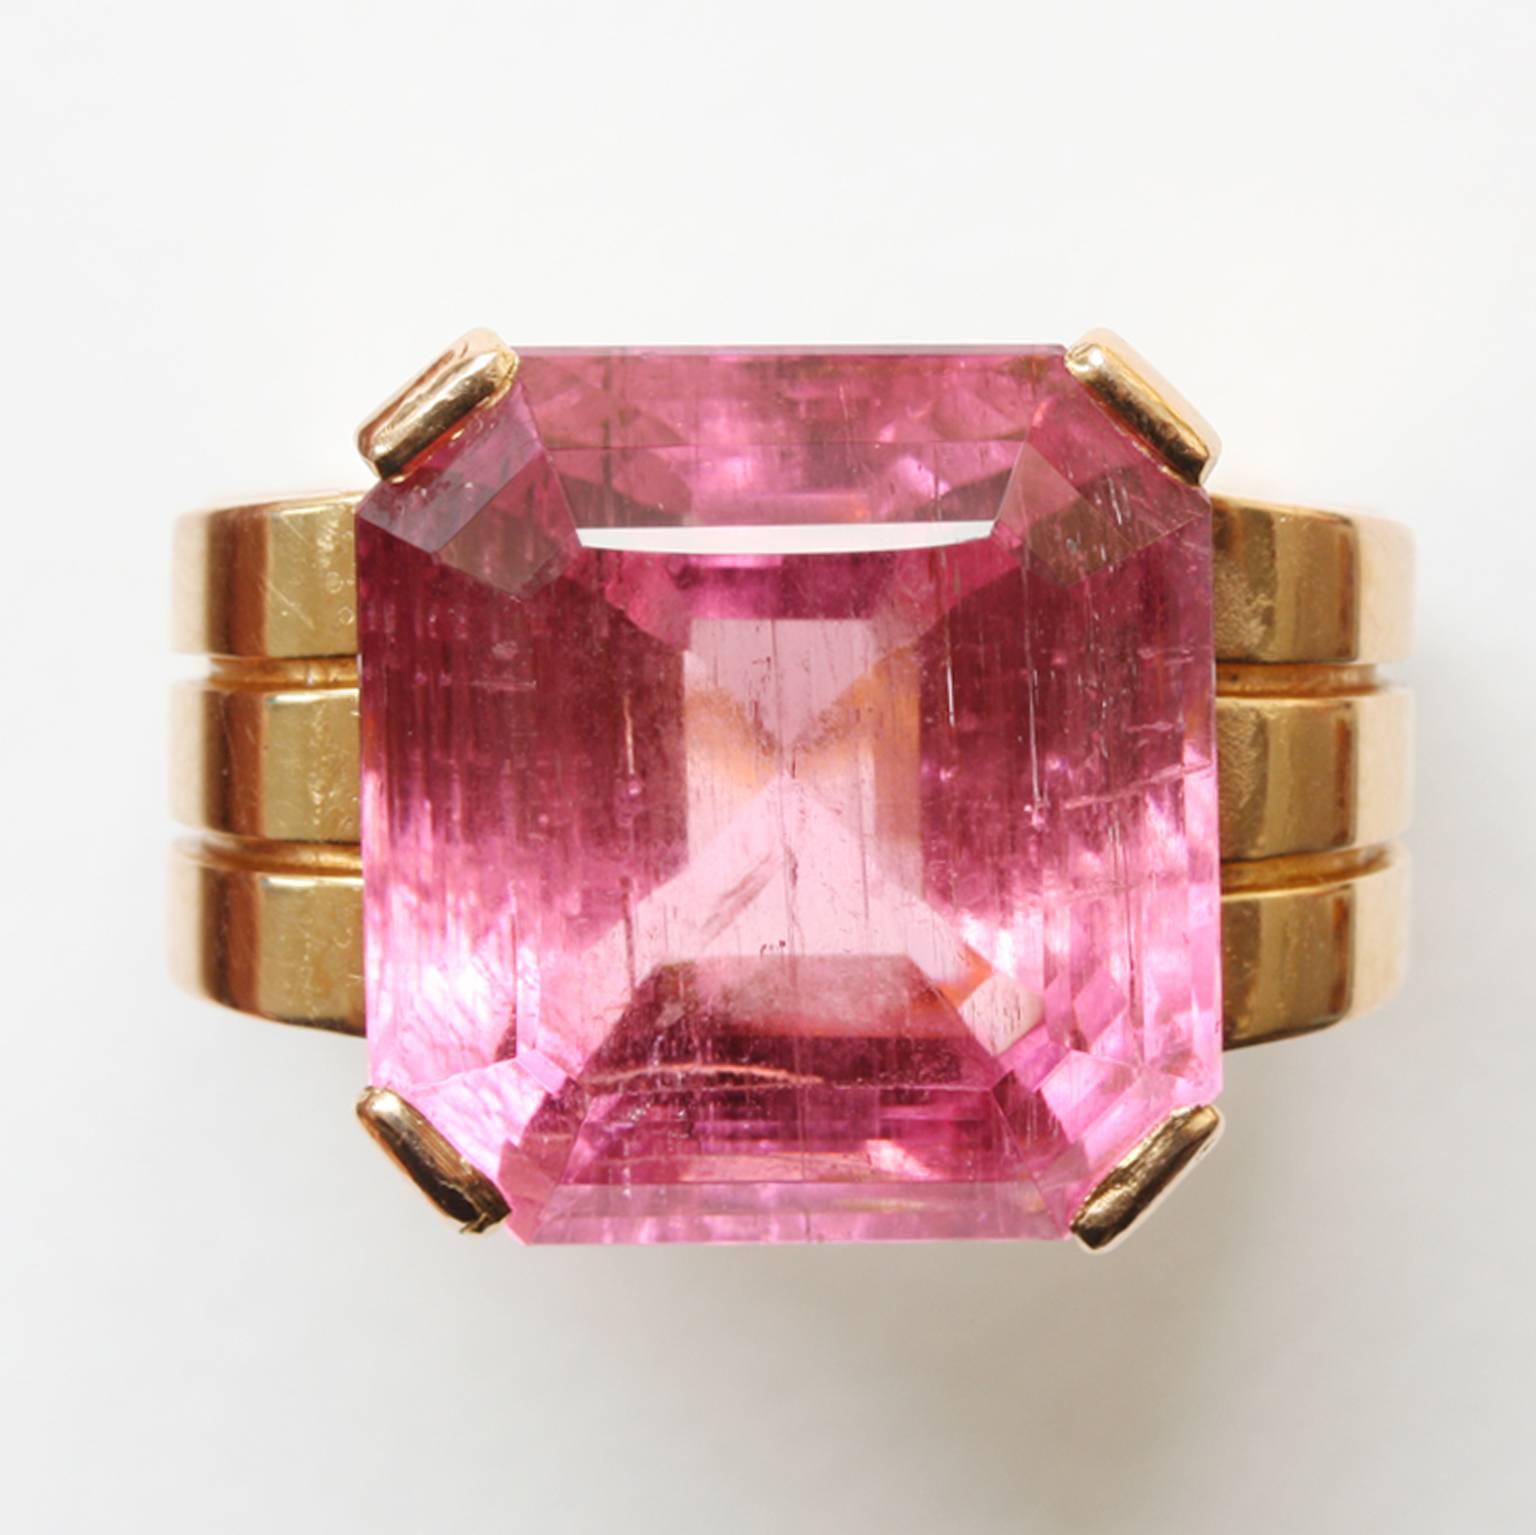 A large 18 carat rosé gold tank ring set with a square step cut bright pink tourmaline (app. 20 carats), masters mark: Henry Fougery and fully signed: Mathy, Paris for Charles Mathy, France. circa 1925-1930.

weight: 21.4 grams
ring size: 18